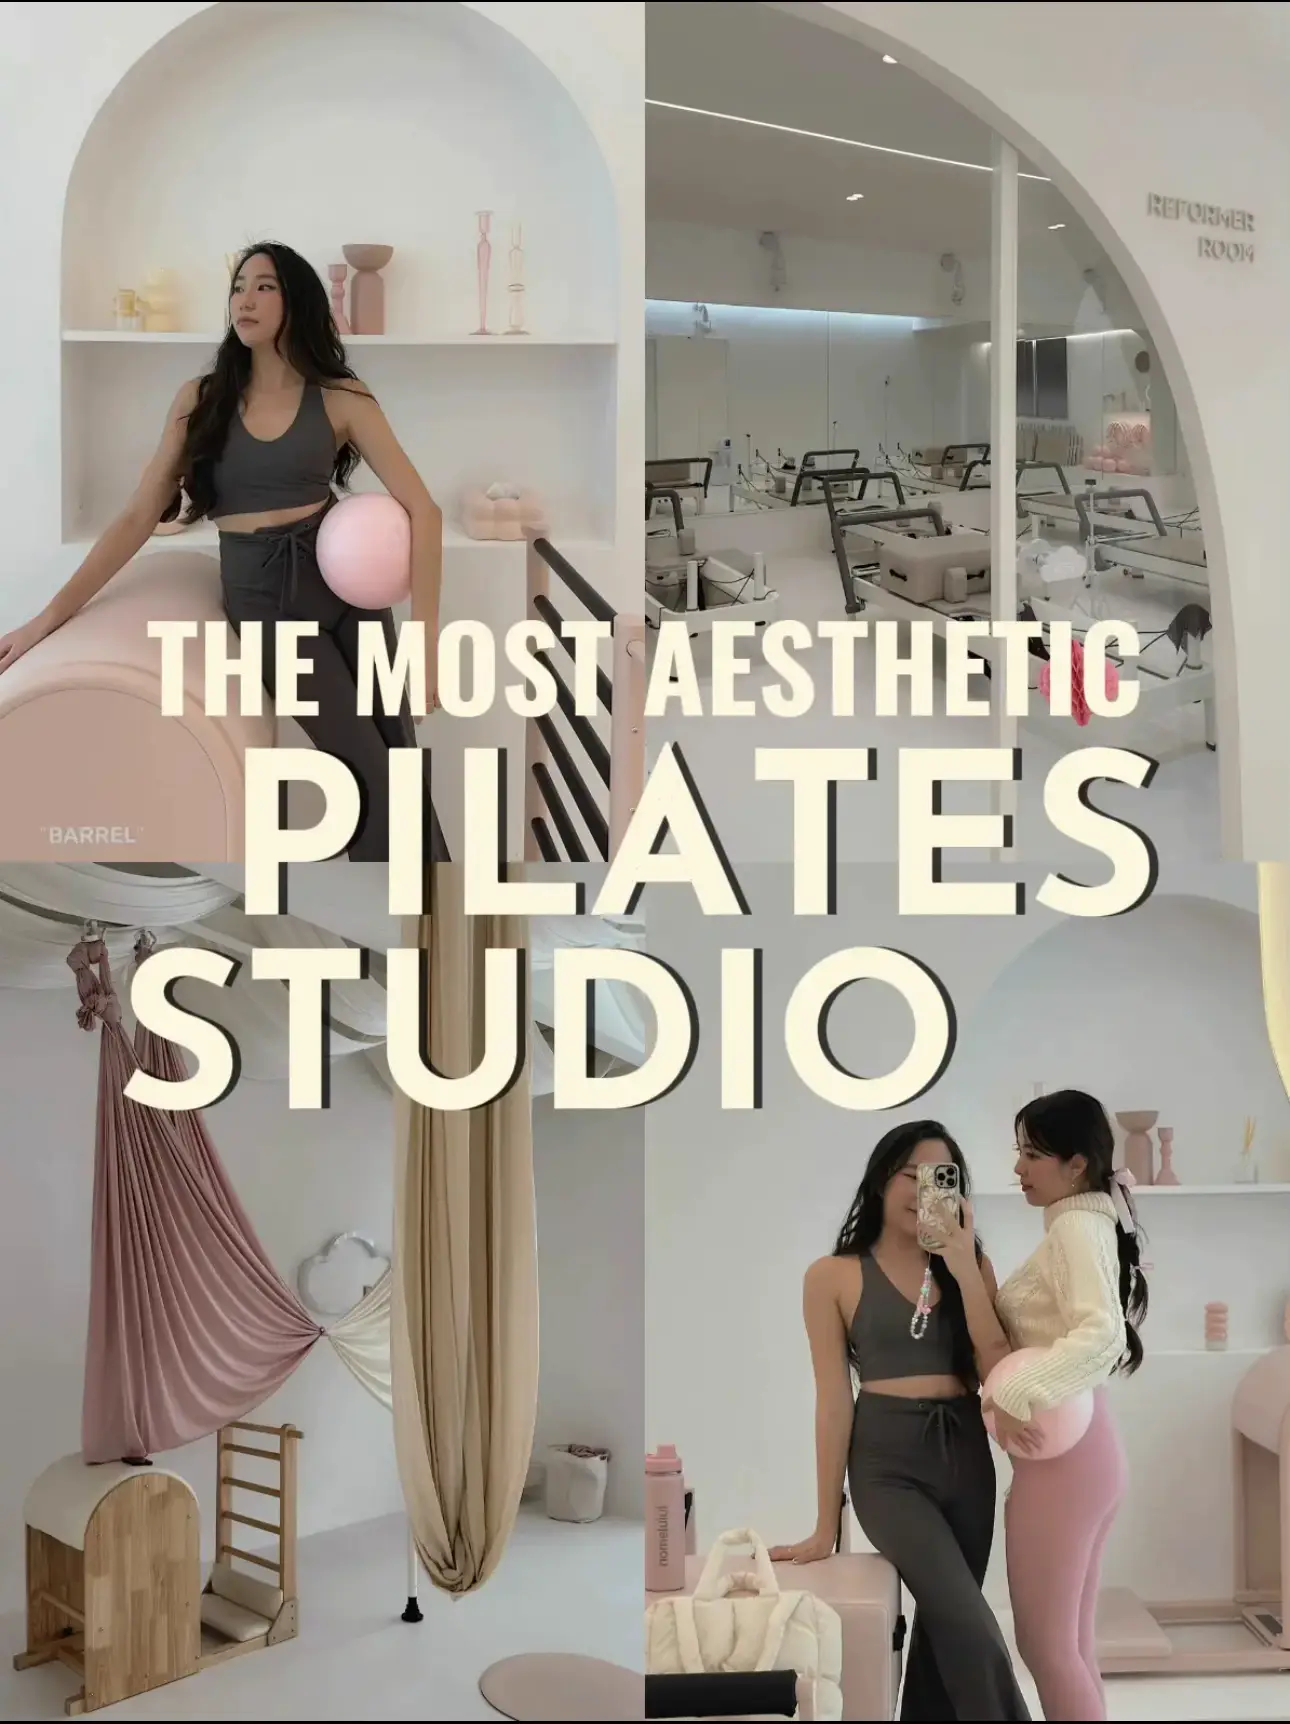 Loving the Pink Pilates Princess  Gallery posted by SoHerStyle